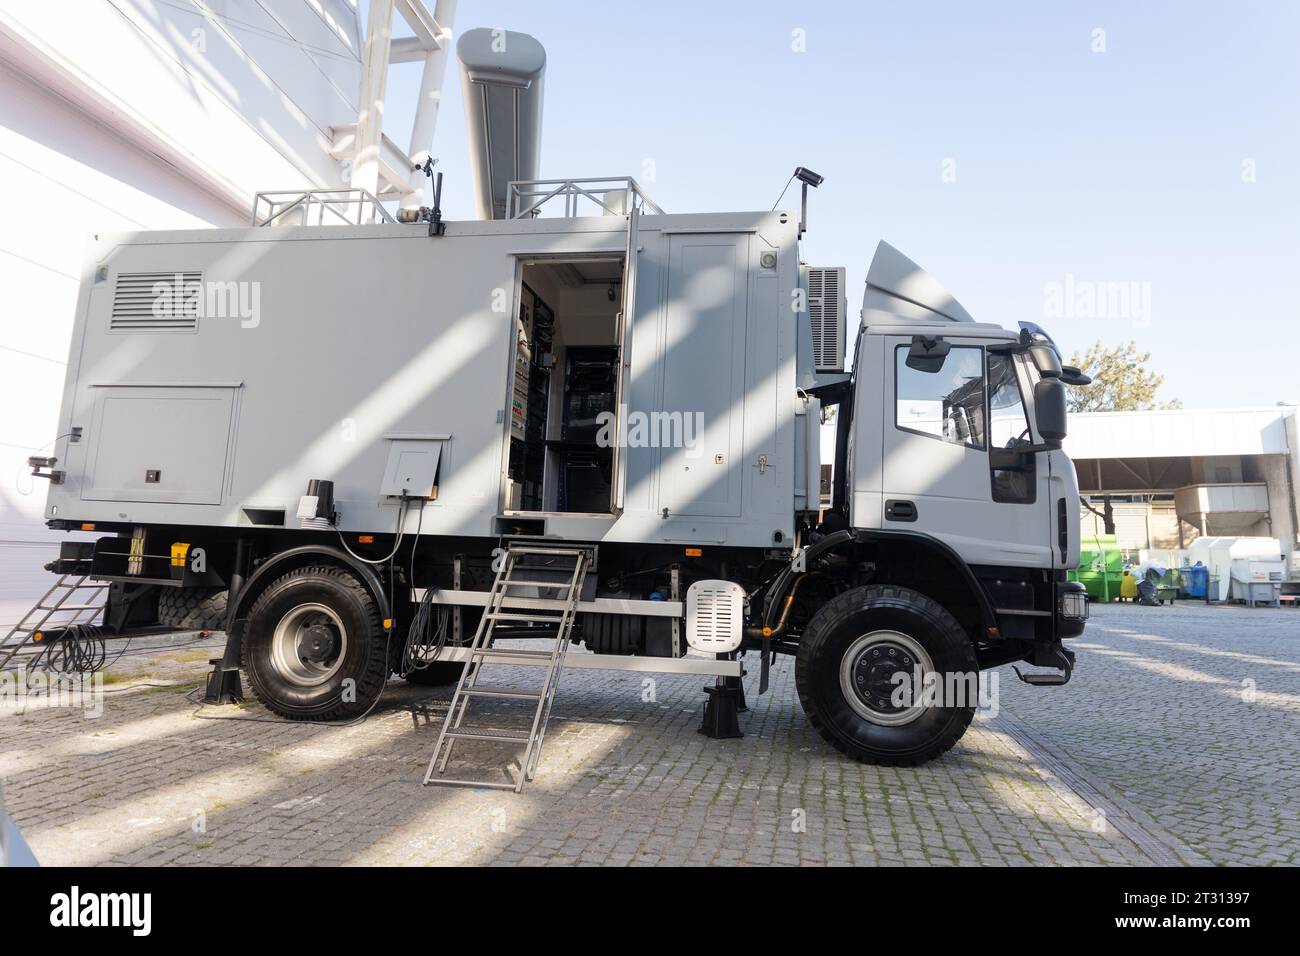 Large specialized vehicle with equipment. Stock Photo